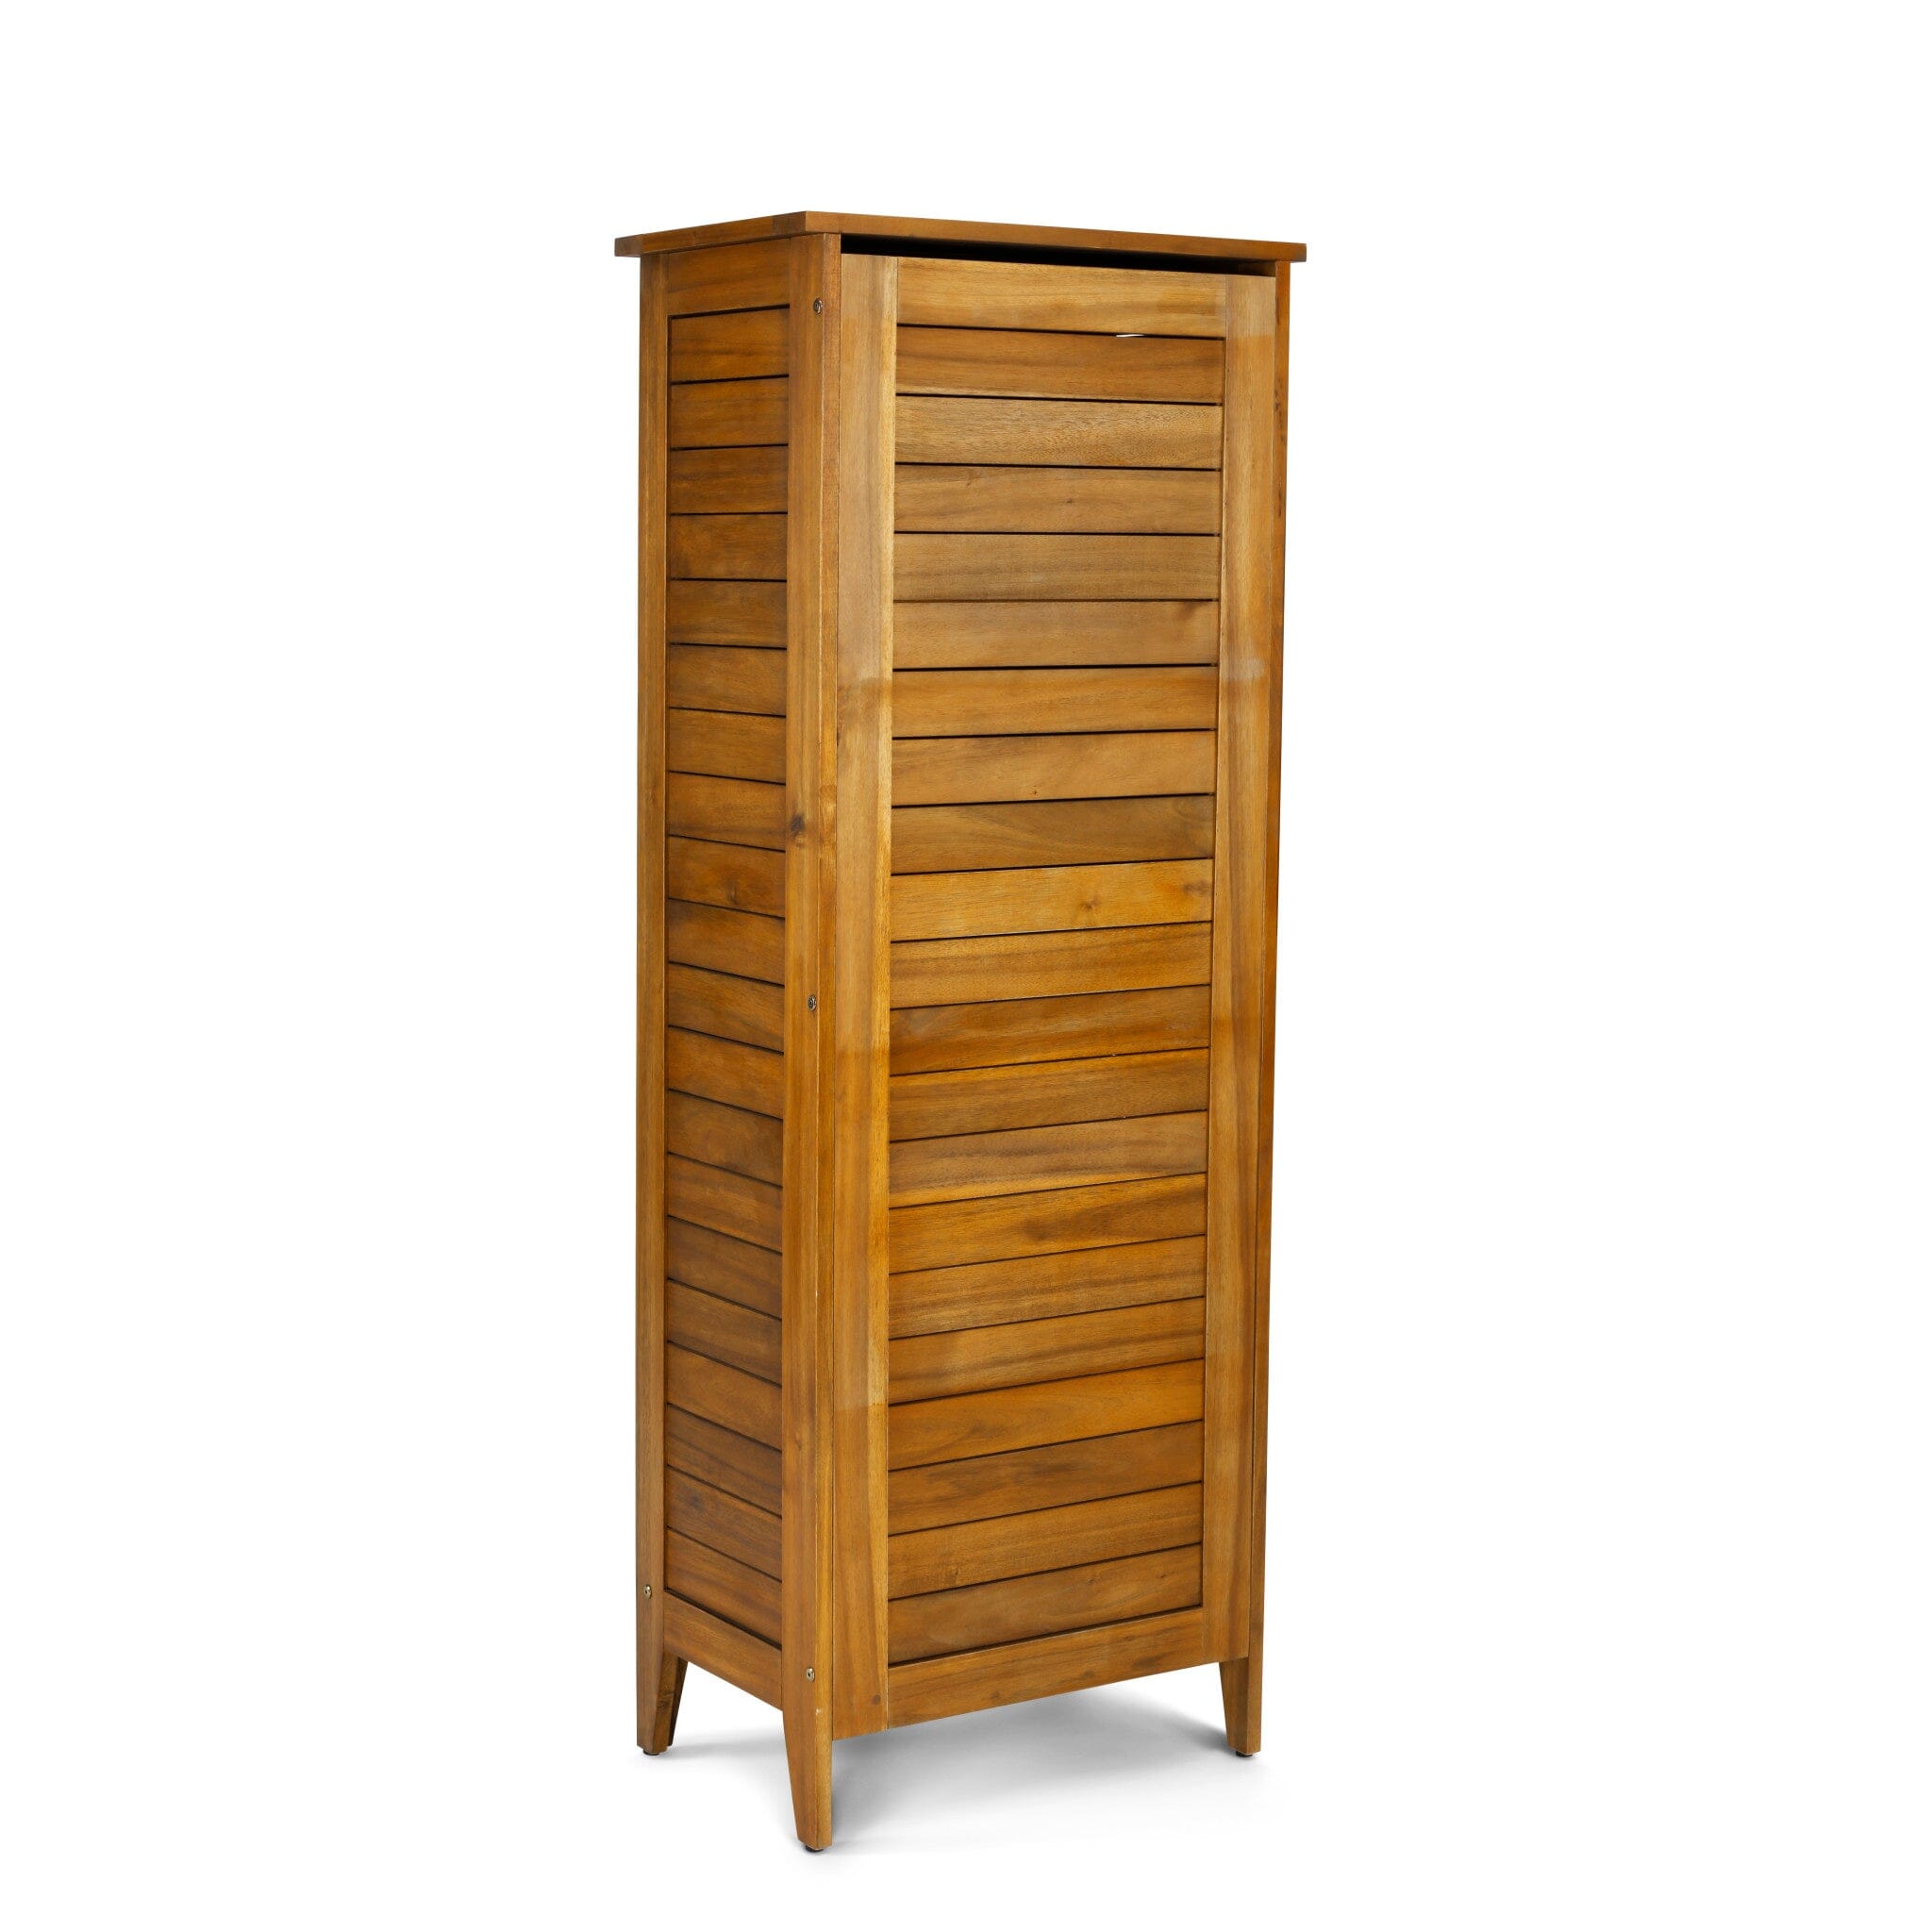 Traditional Storage Cabinet By Maho Outdoor Storage Maho